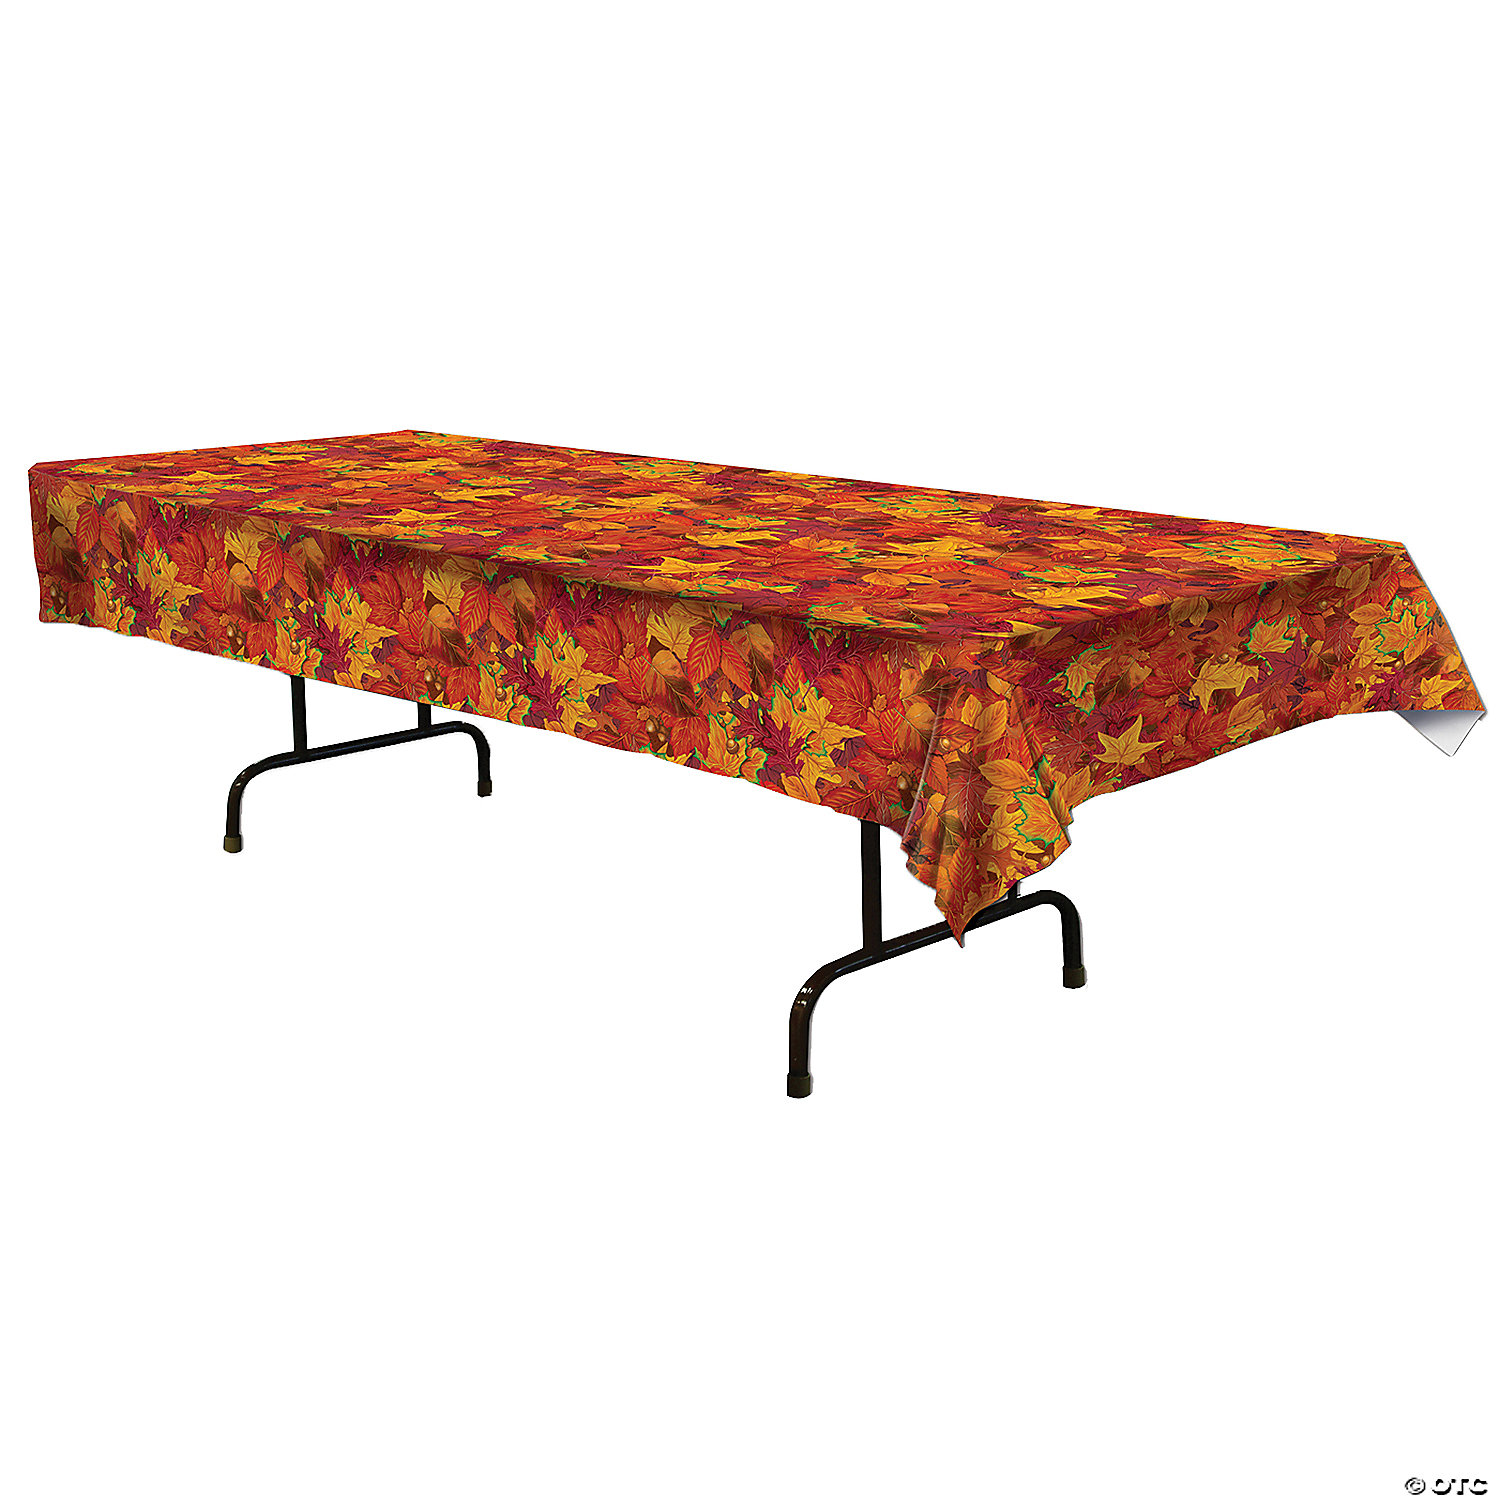 FALL LEAF TABLE COVER - THANKSGIVING